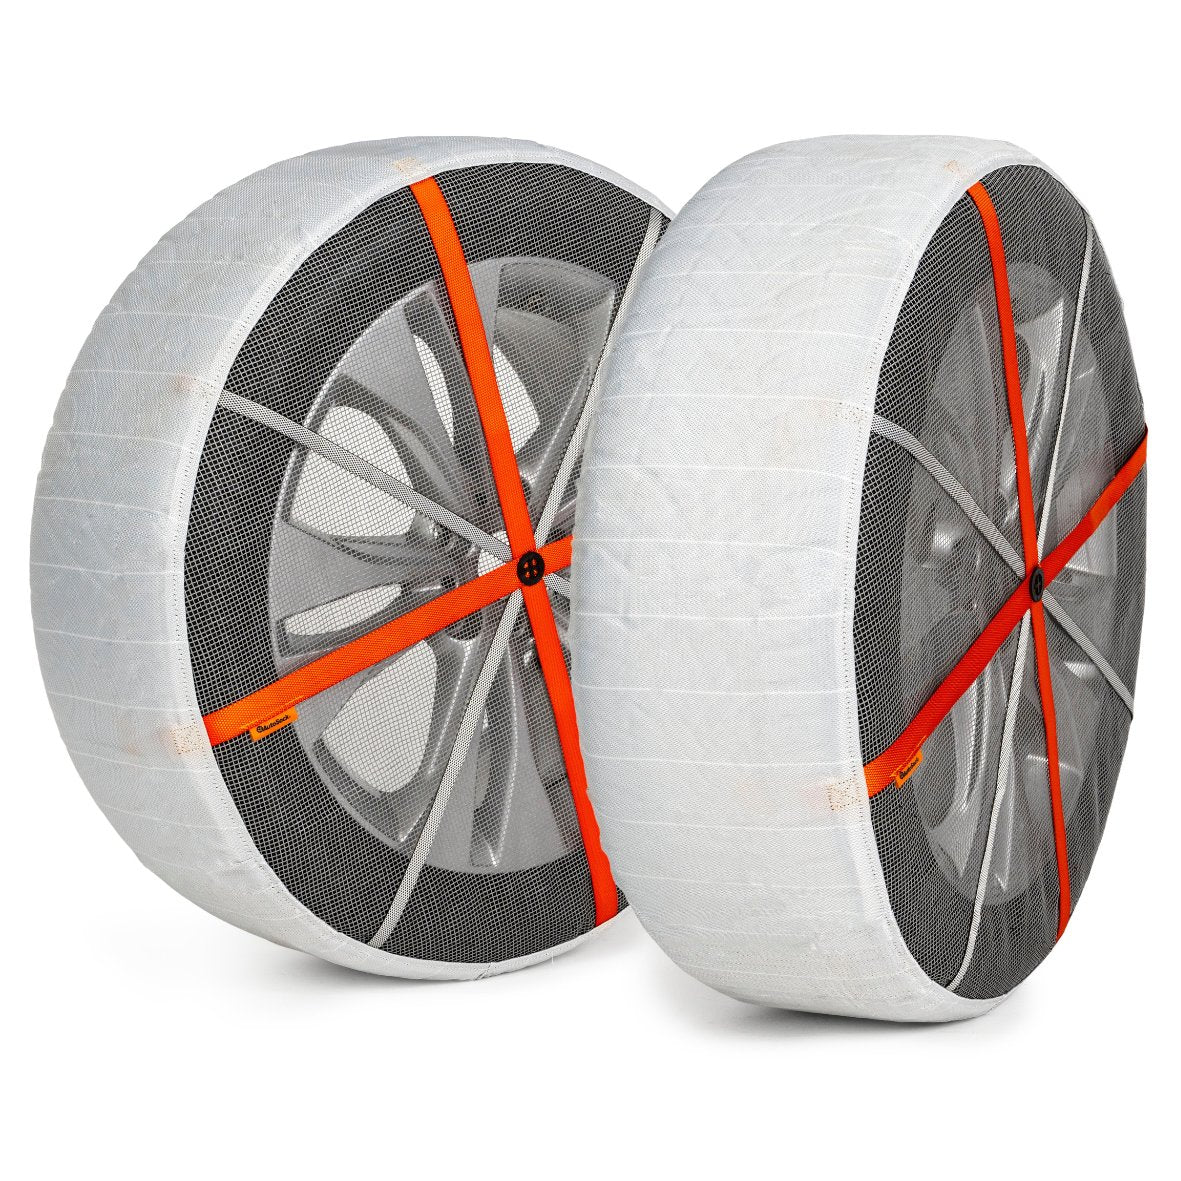 Pair of AutoSock textile snow chains installed on two wheels in front of white background showing product frontside AL67 AL 67